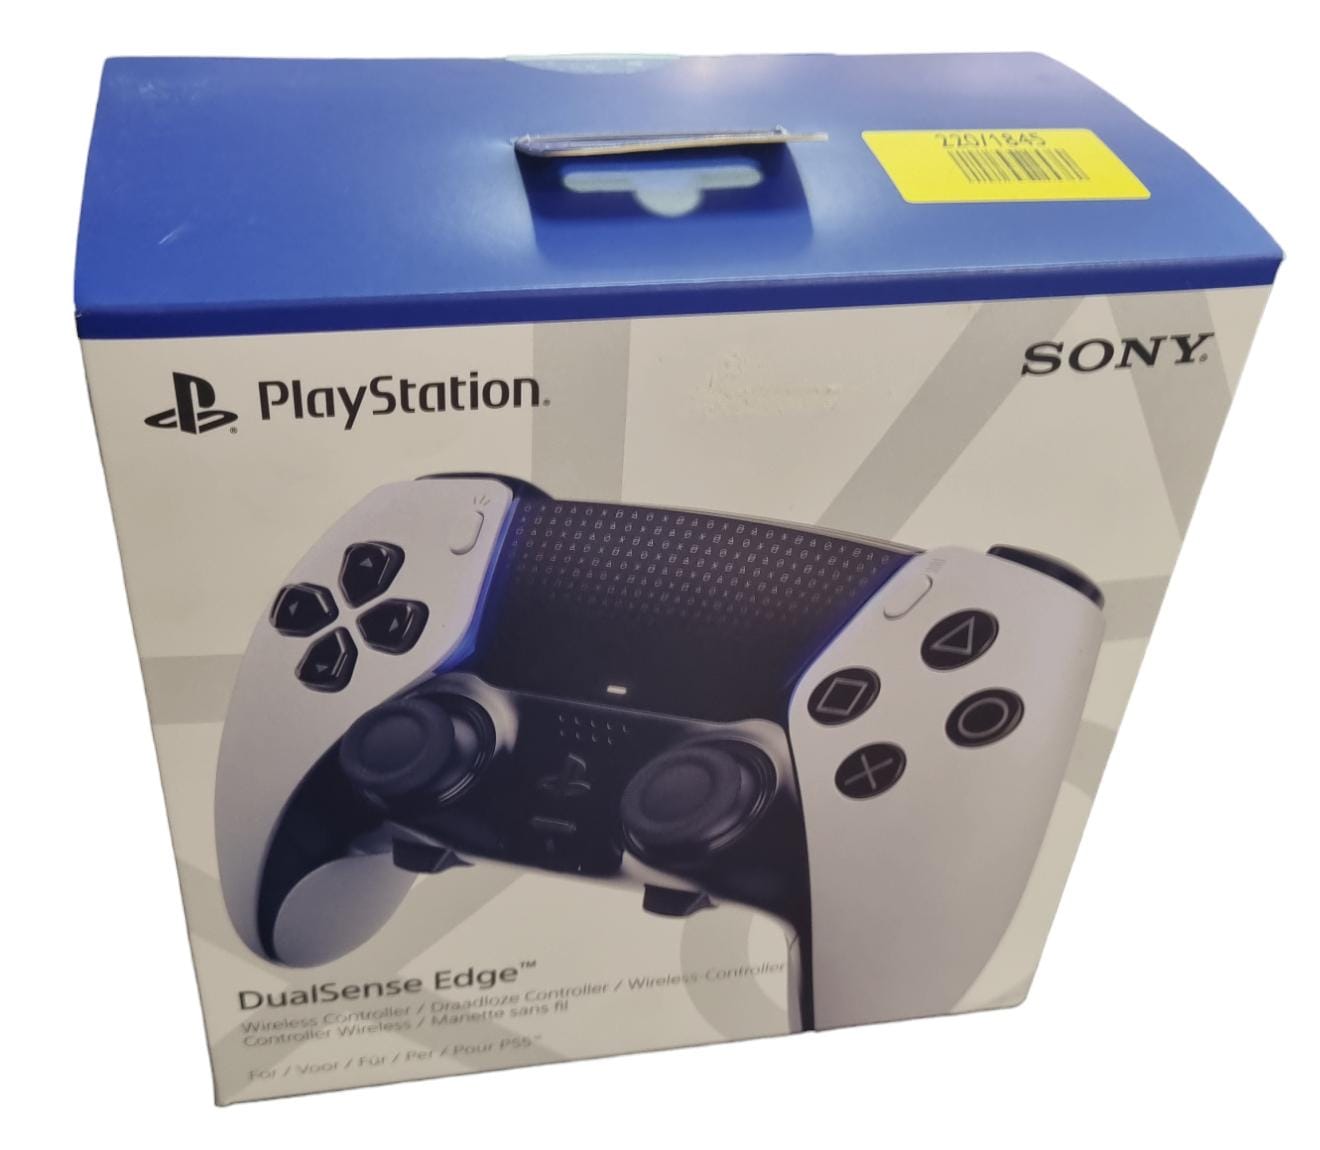 Sony Playstation DualSense Edge for PS5 - CFI-ZCP1 - BOXED & SEALED